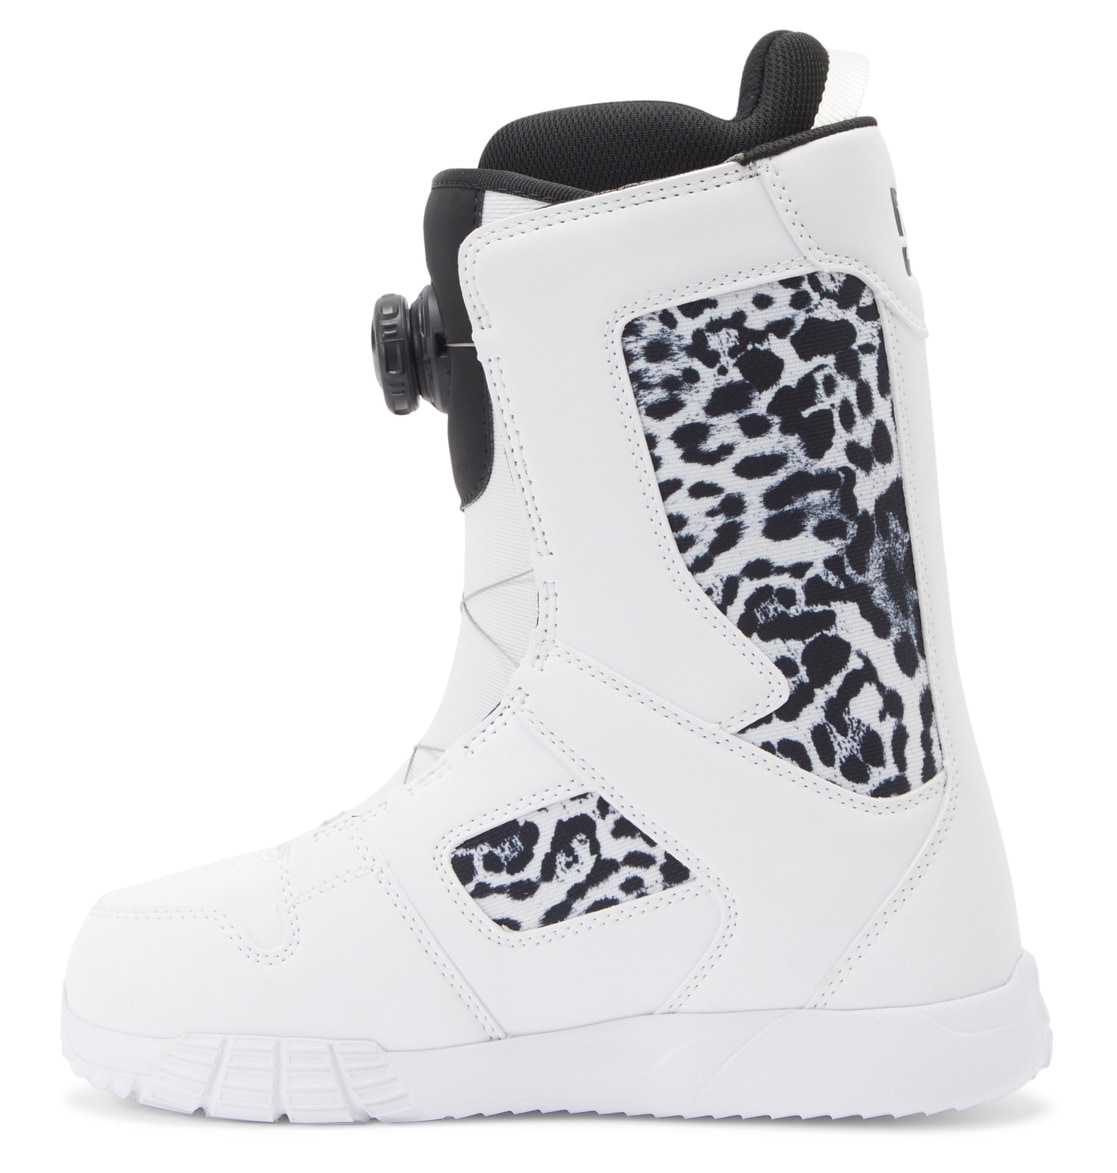 DC Shoes Snowboardboots »Phase«